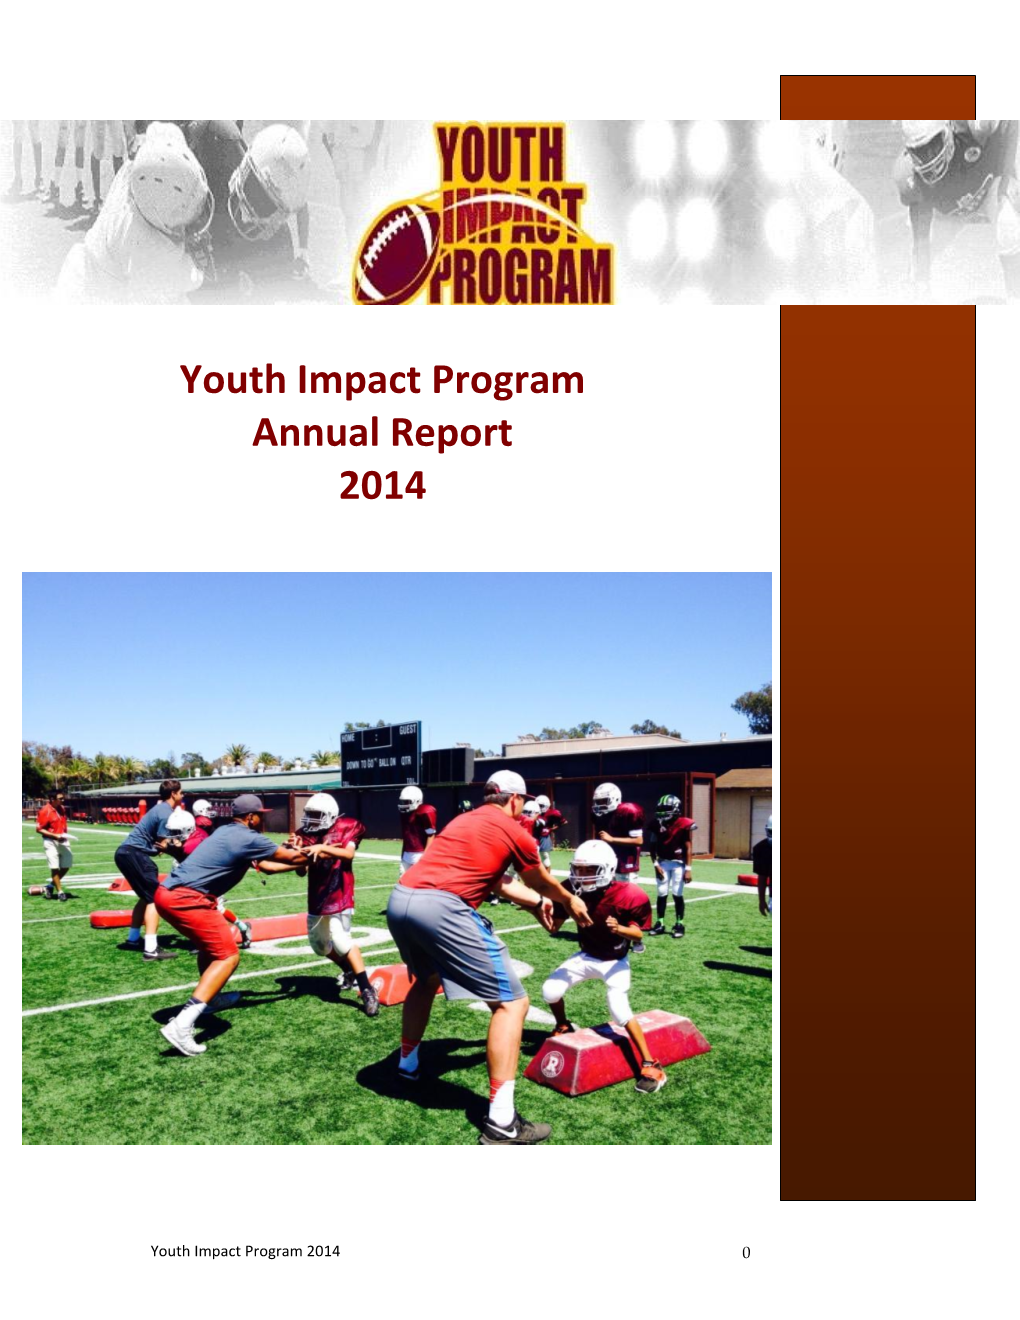 Youth Impact Program Annual Report 2014